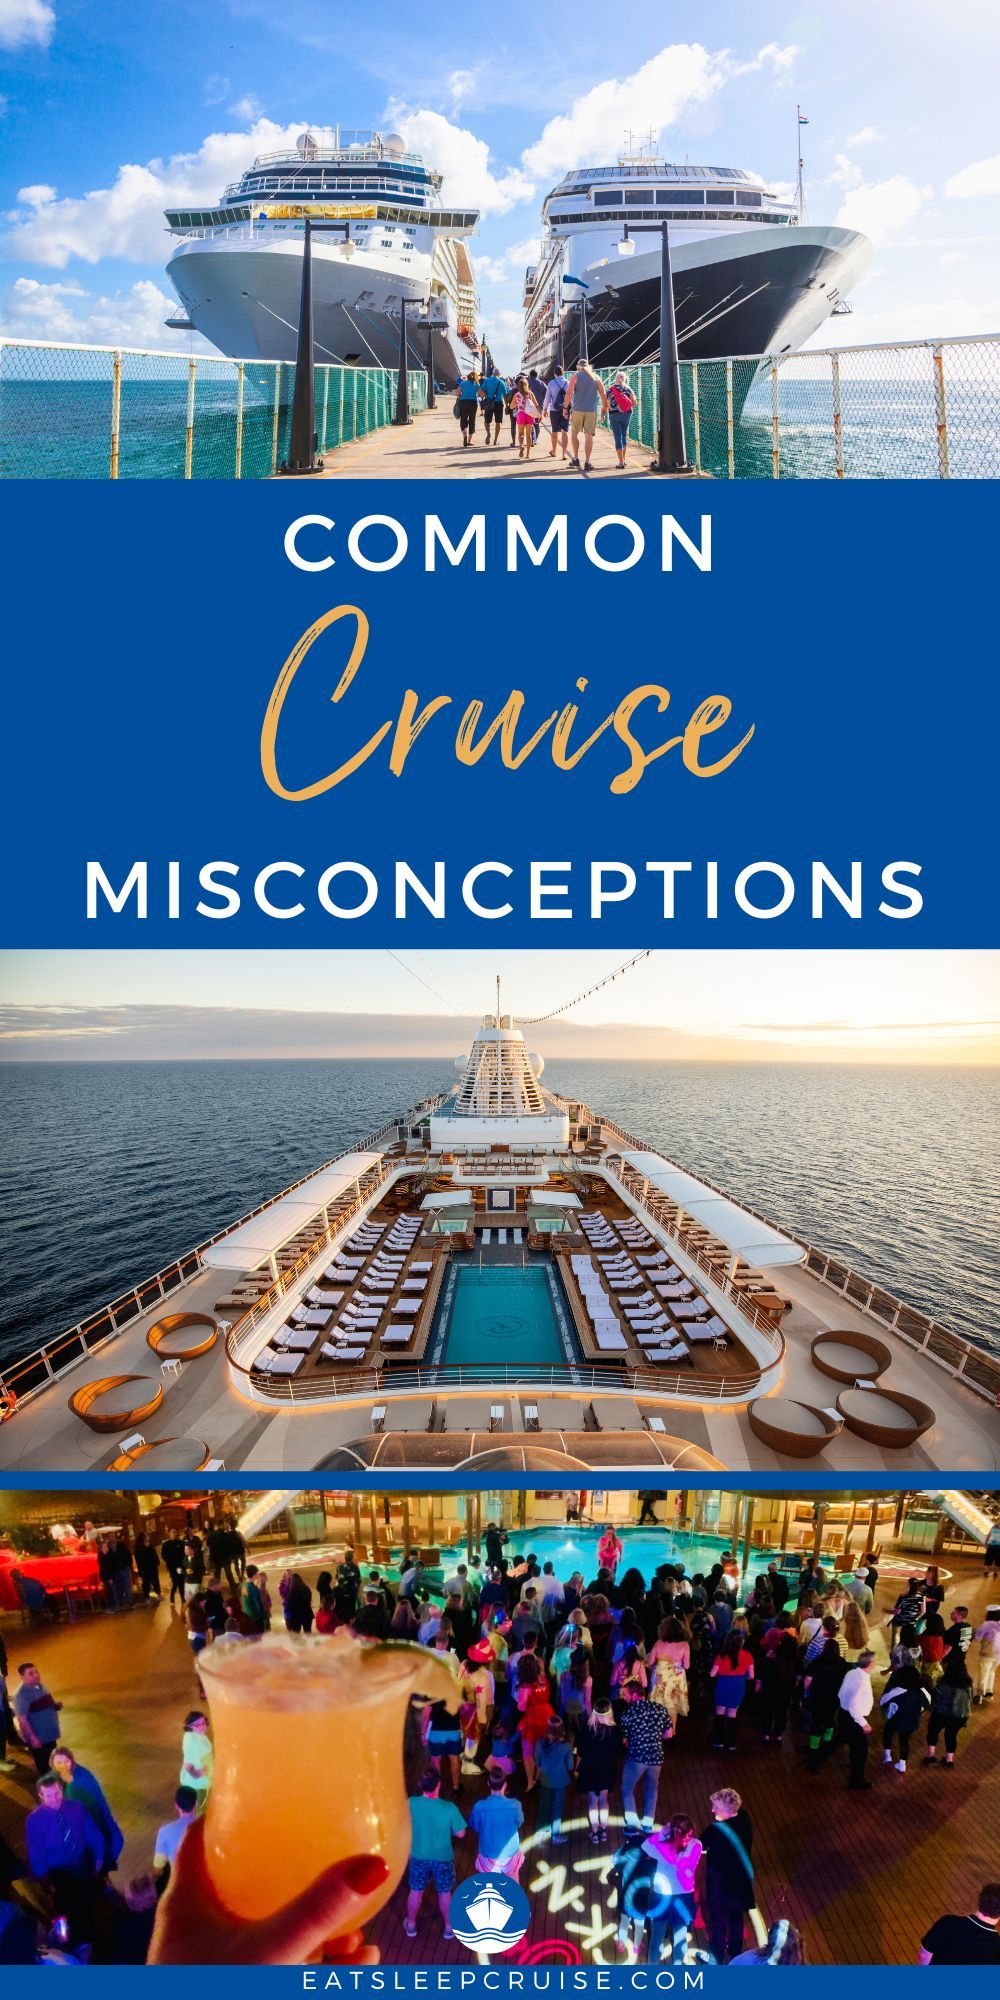 Common Cruise Misconceptions